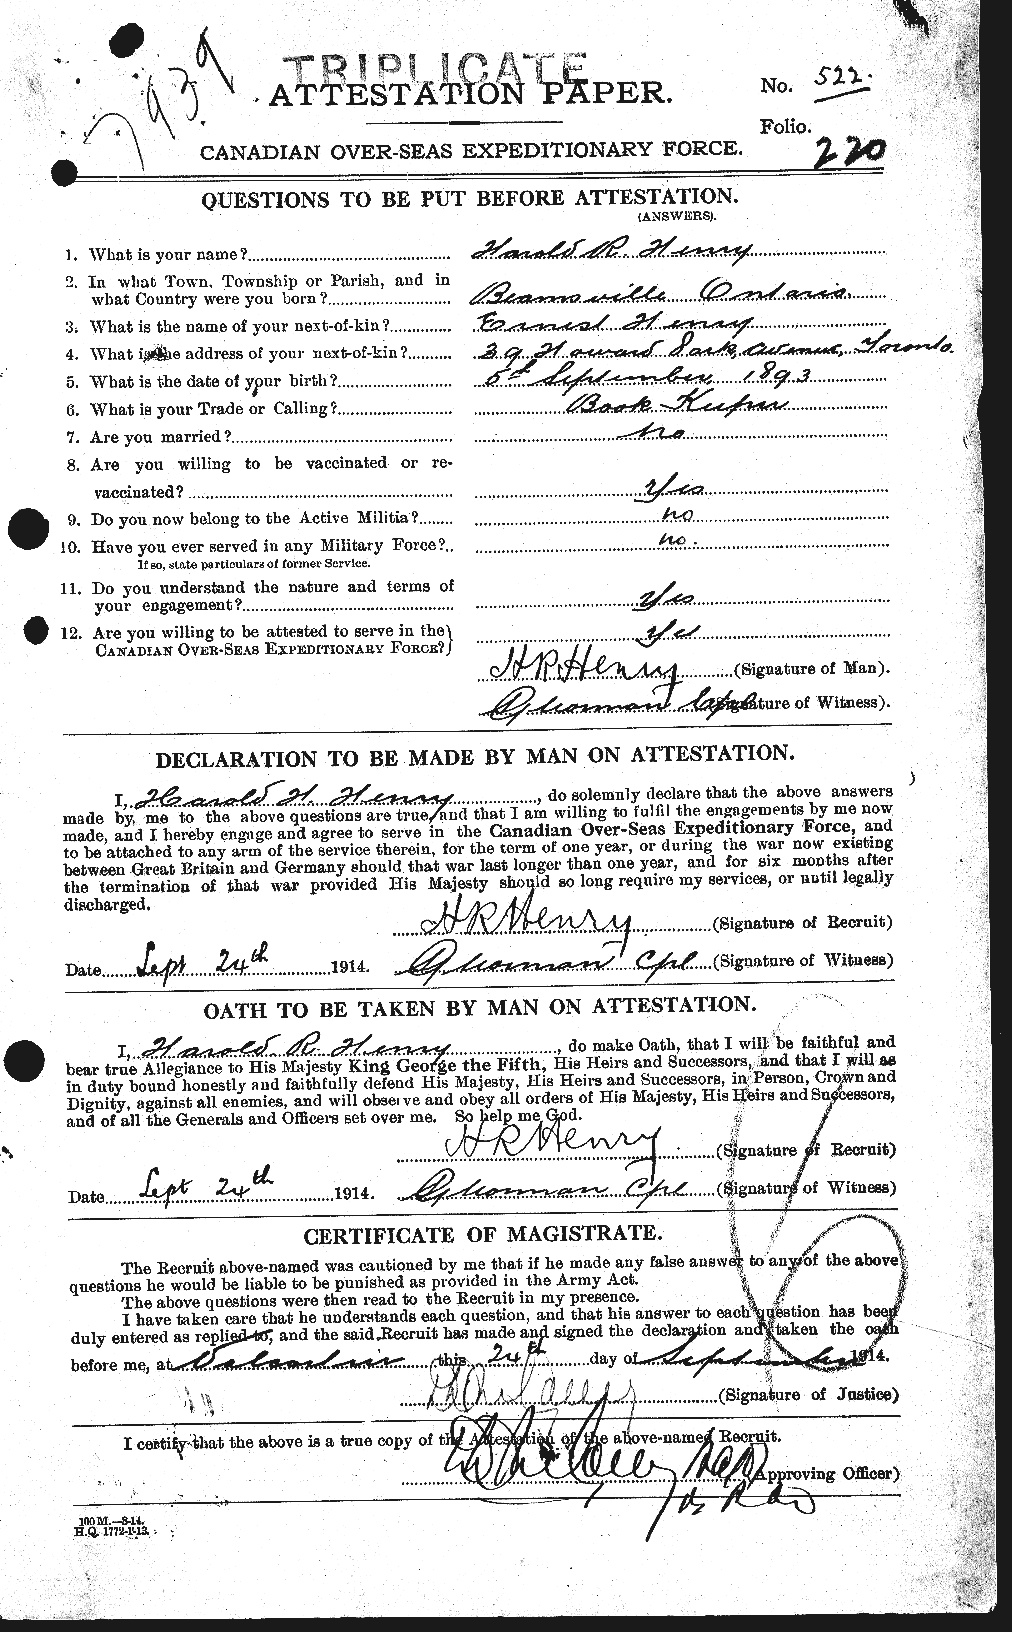 Personnel Records of the First World War - CEF 392886a